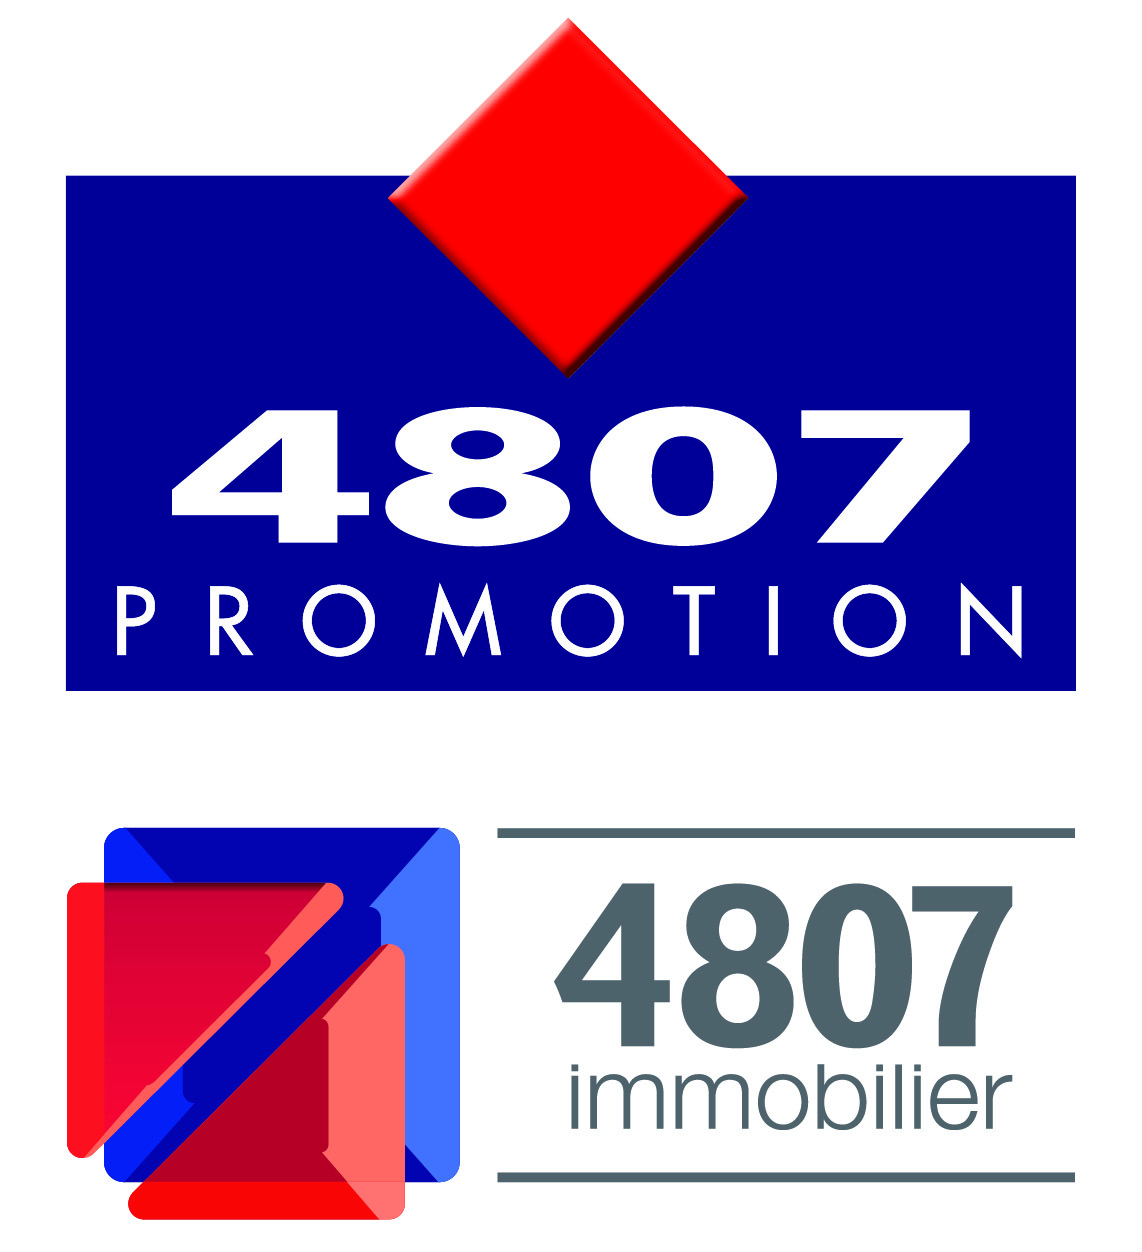 4807 IMMOBILIER / 4807 PROMOTION